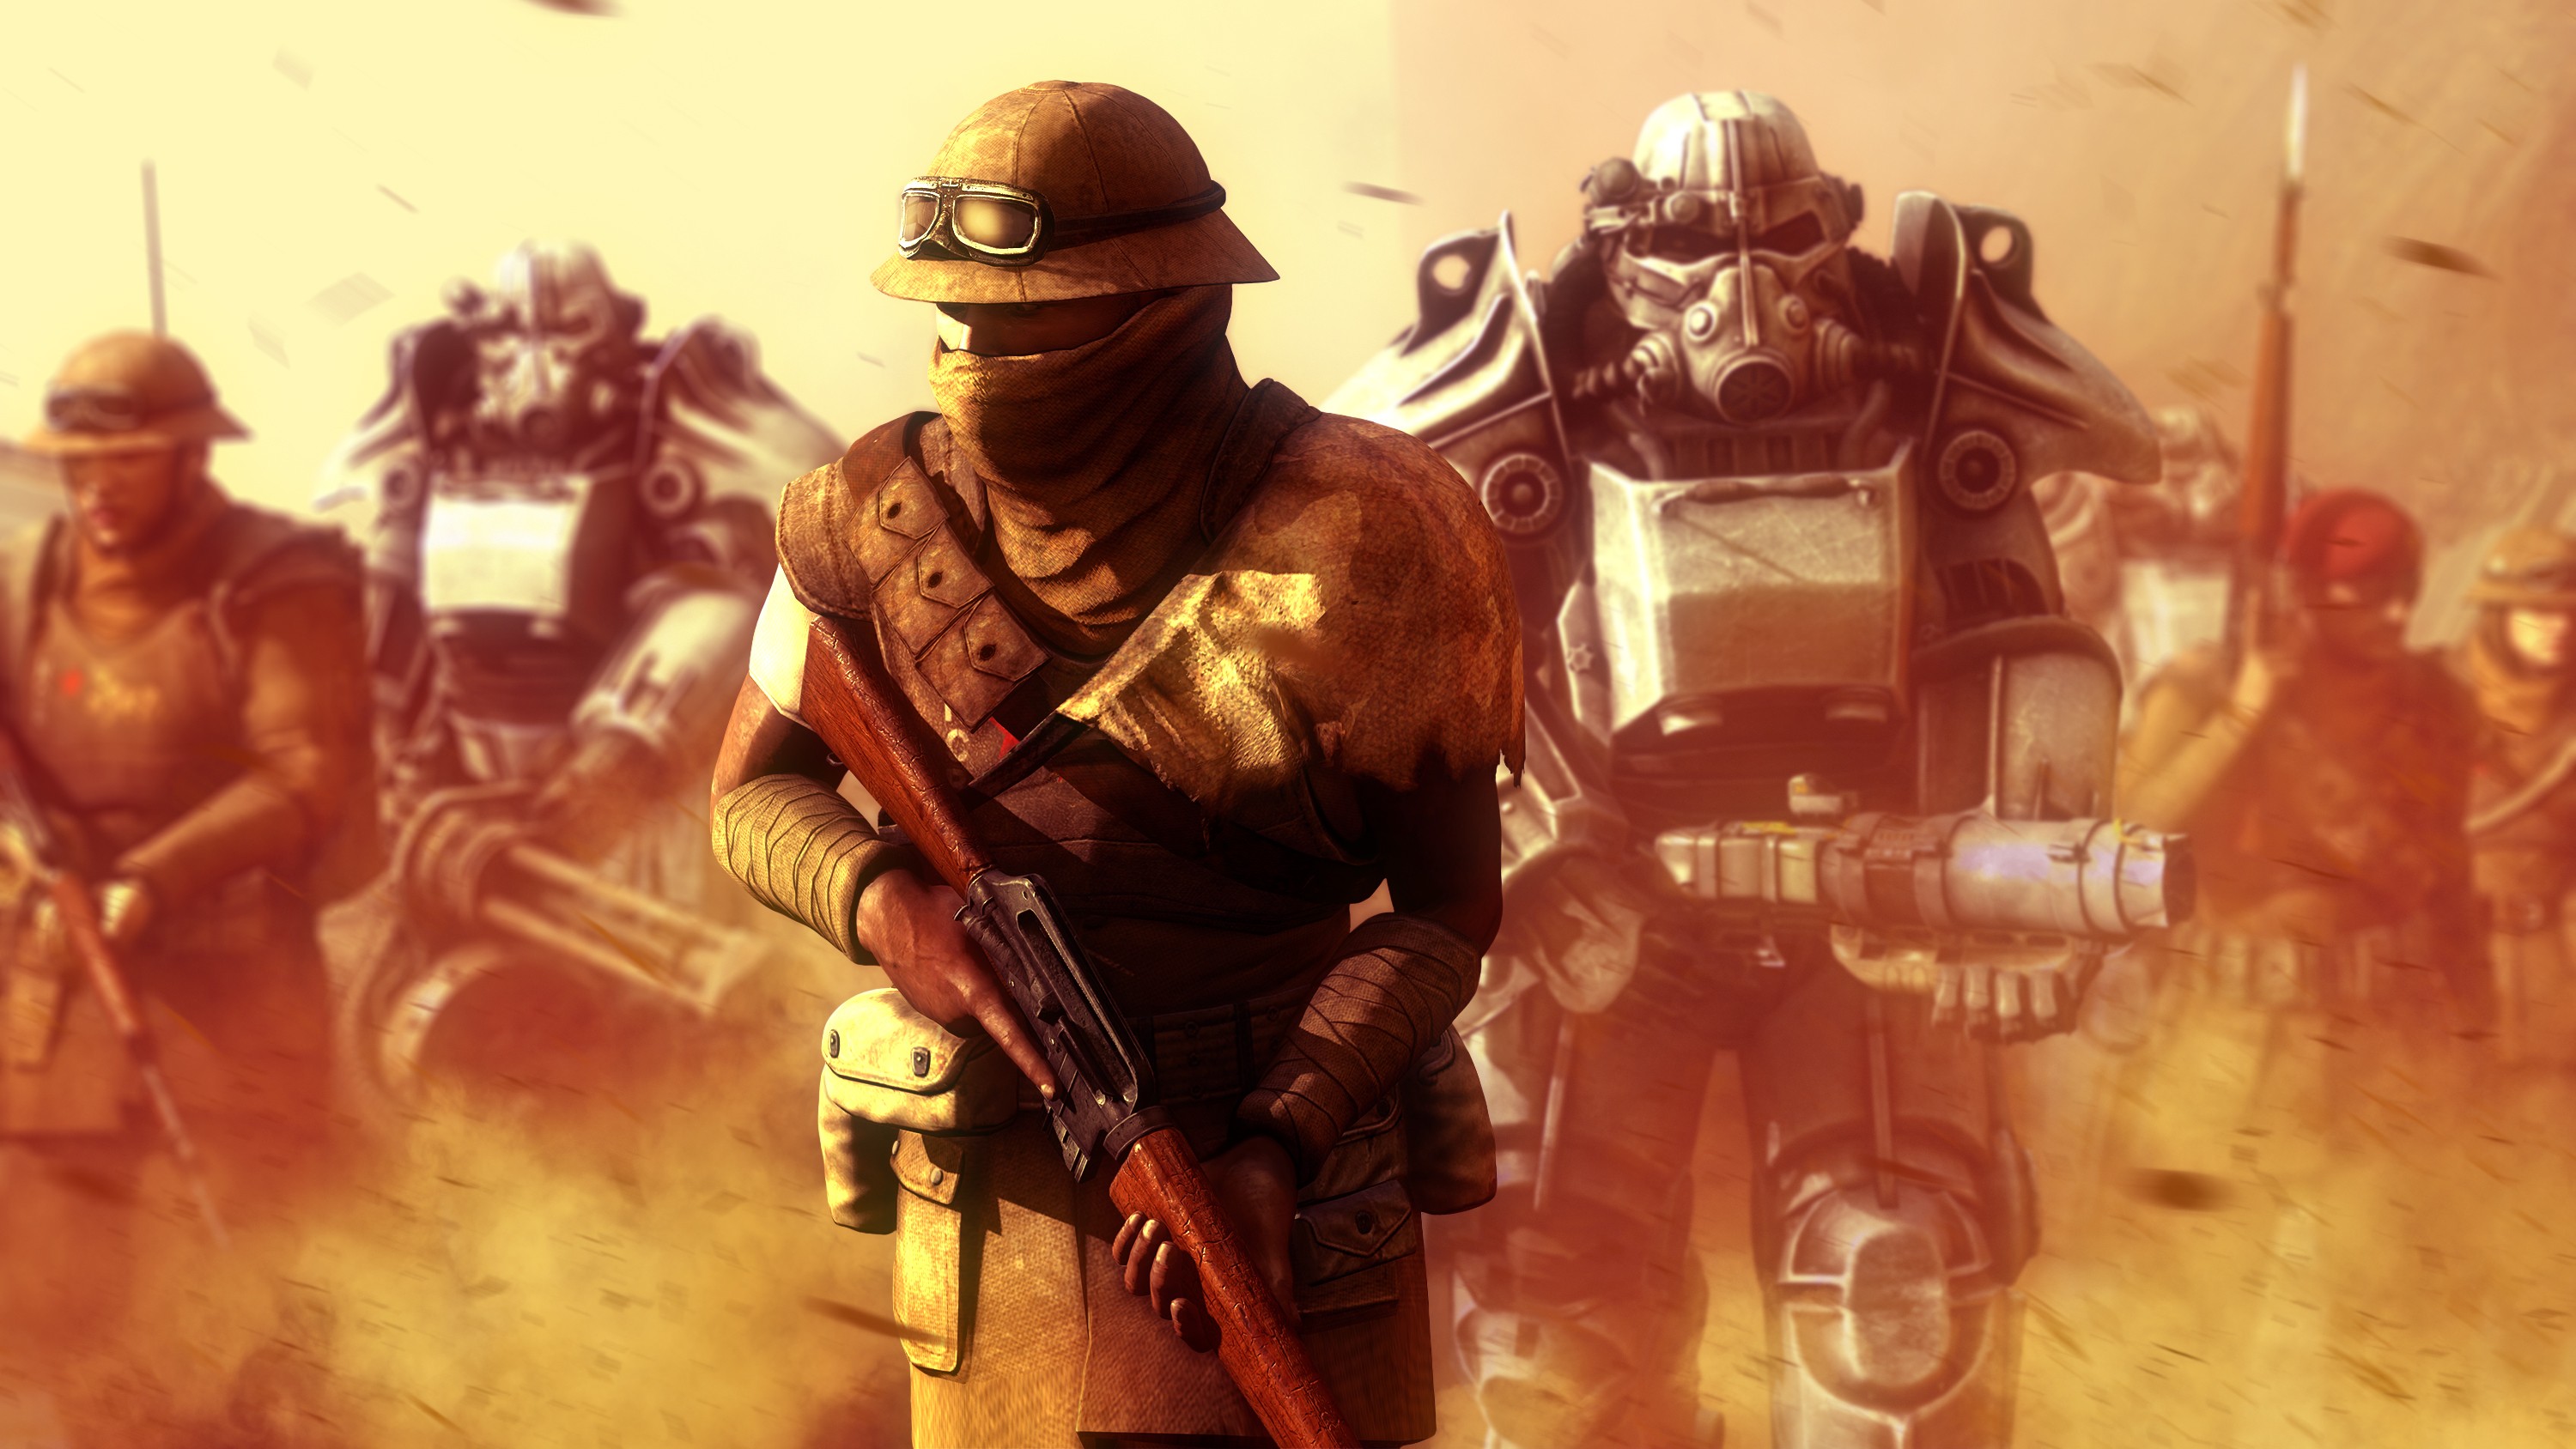 General 3000x1688 video games Fallout: New Vegas New California Republic power armor Fallout NCR PC gaming futuristic apocalyptic weapon video game art Obsidian Entertainment